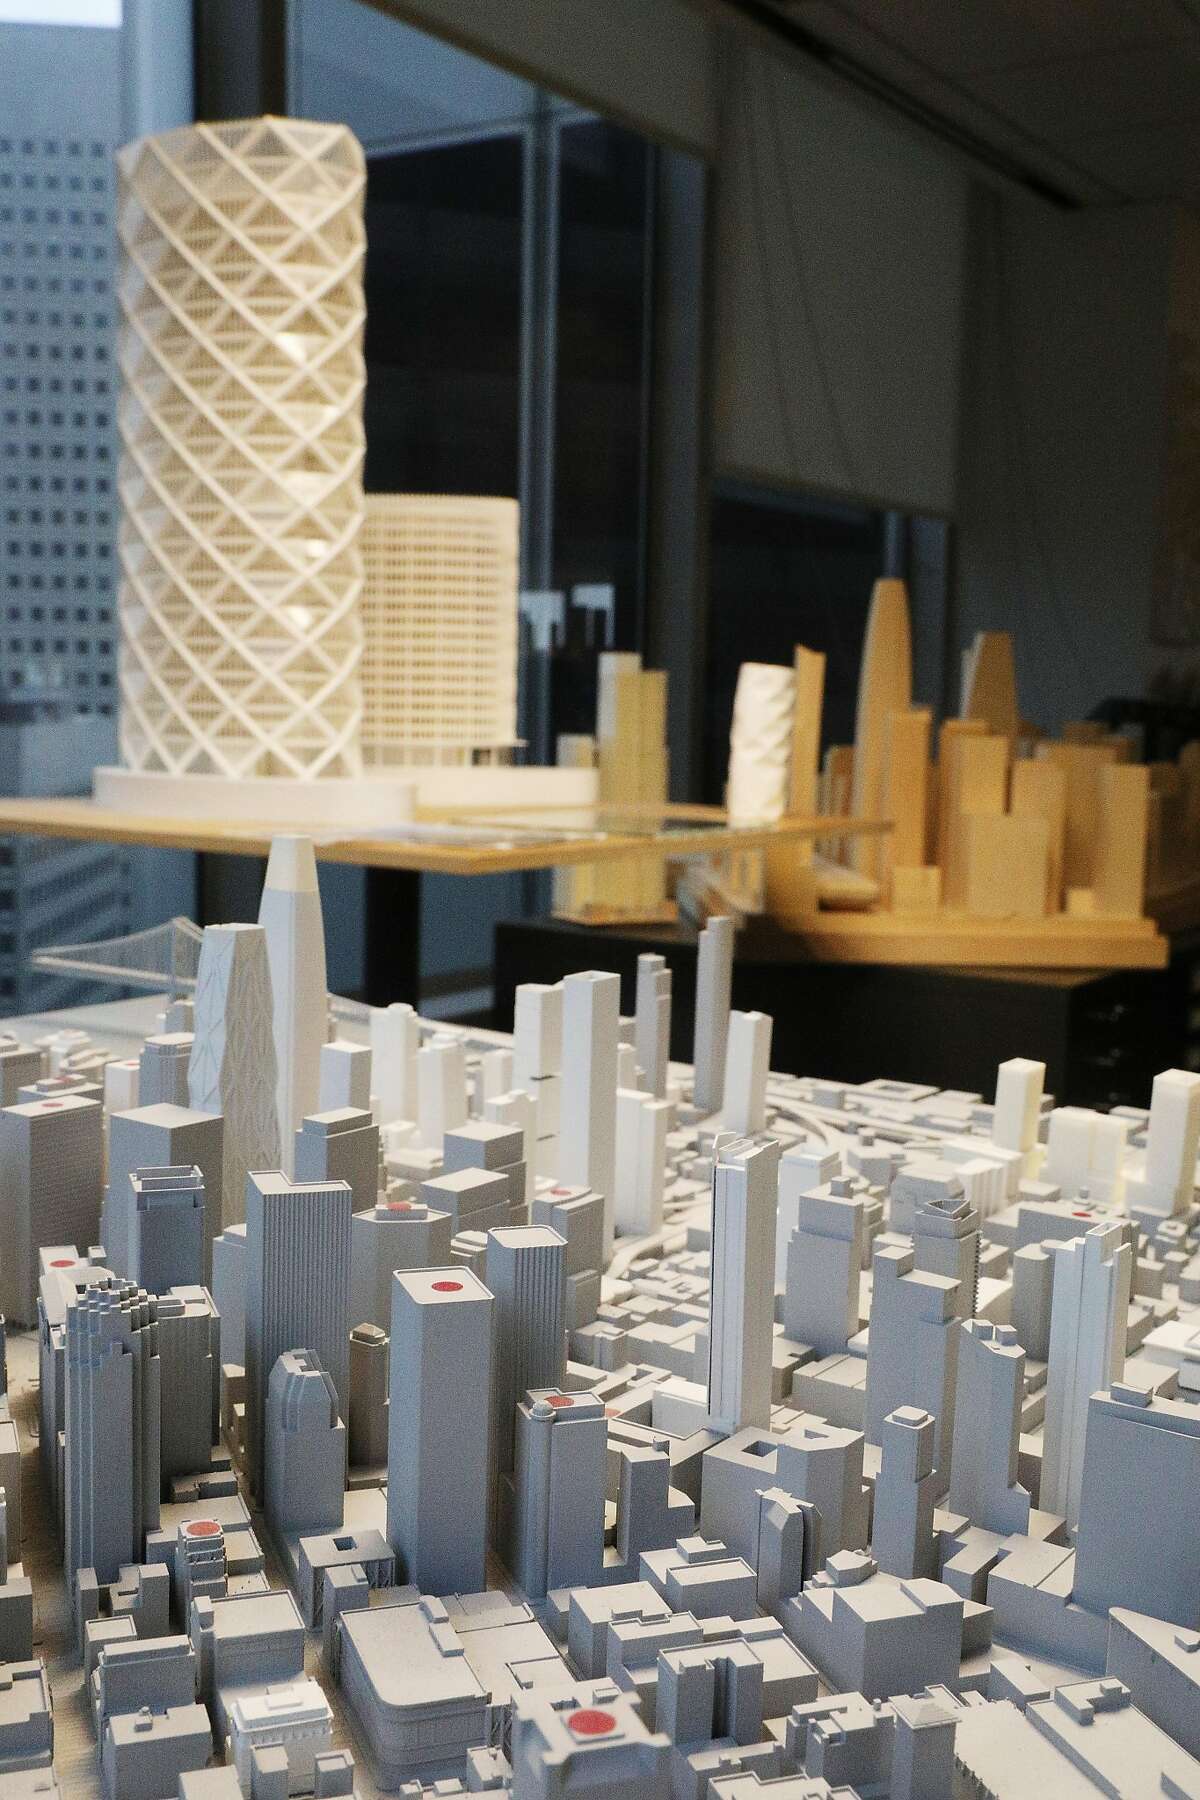 Presentation and study models are seen displayed at Skidmore, Owings & Merrill on Wednesday, March 6, 2019 in San Francisco, Calif.